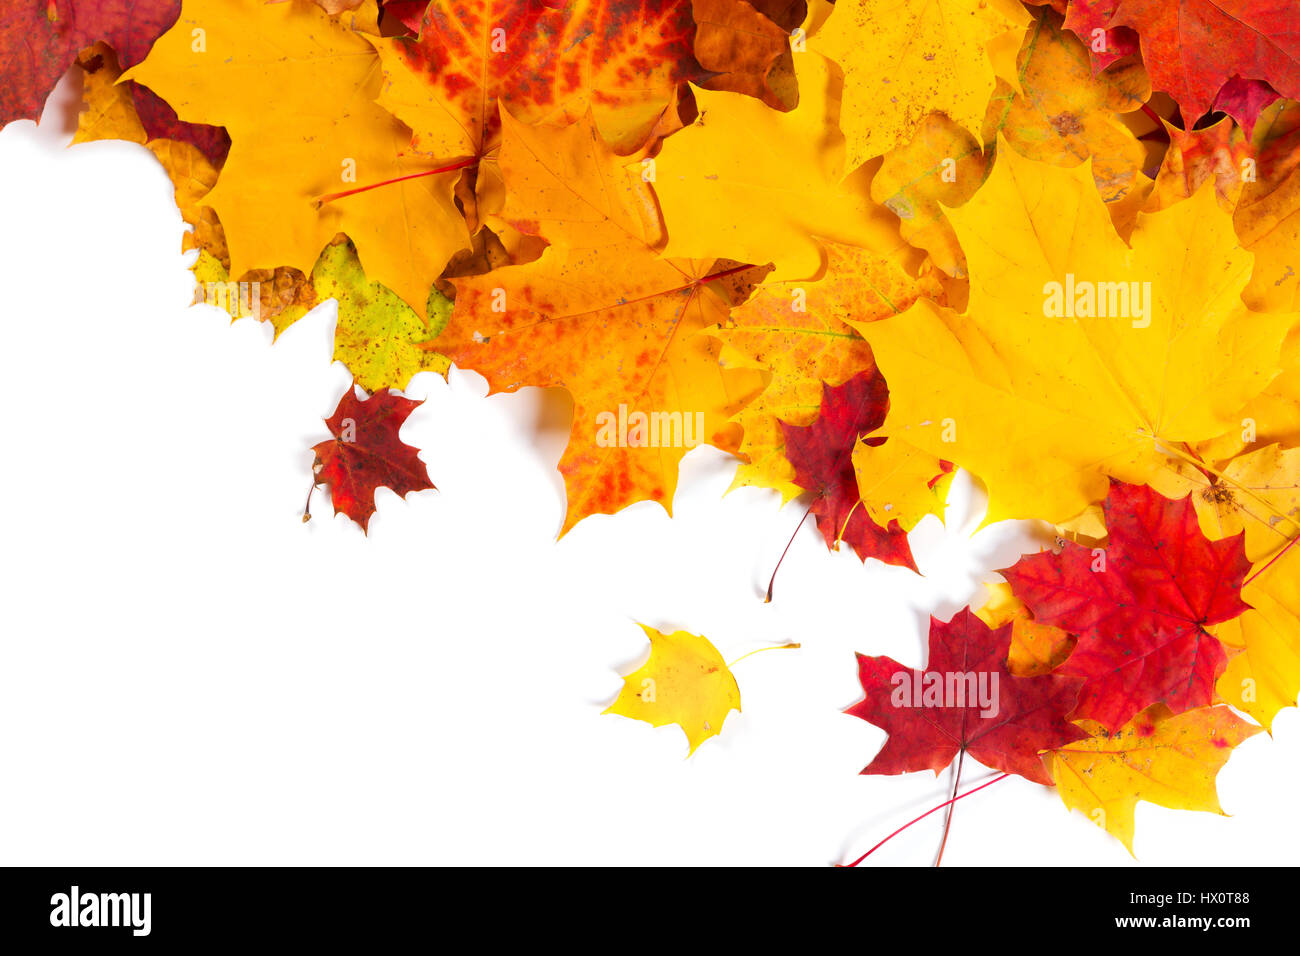 Autumn fall leaves on white background Stock Photo